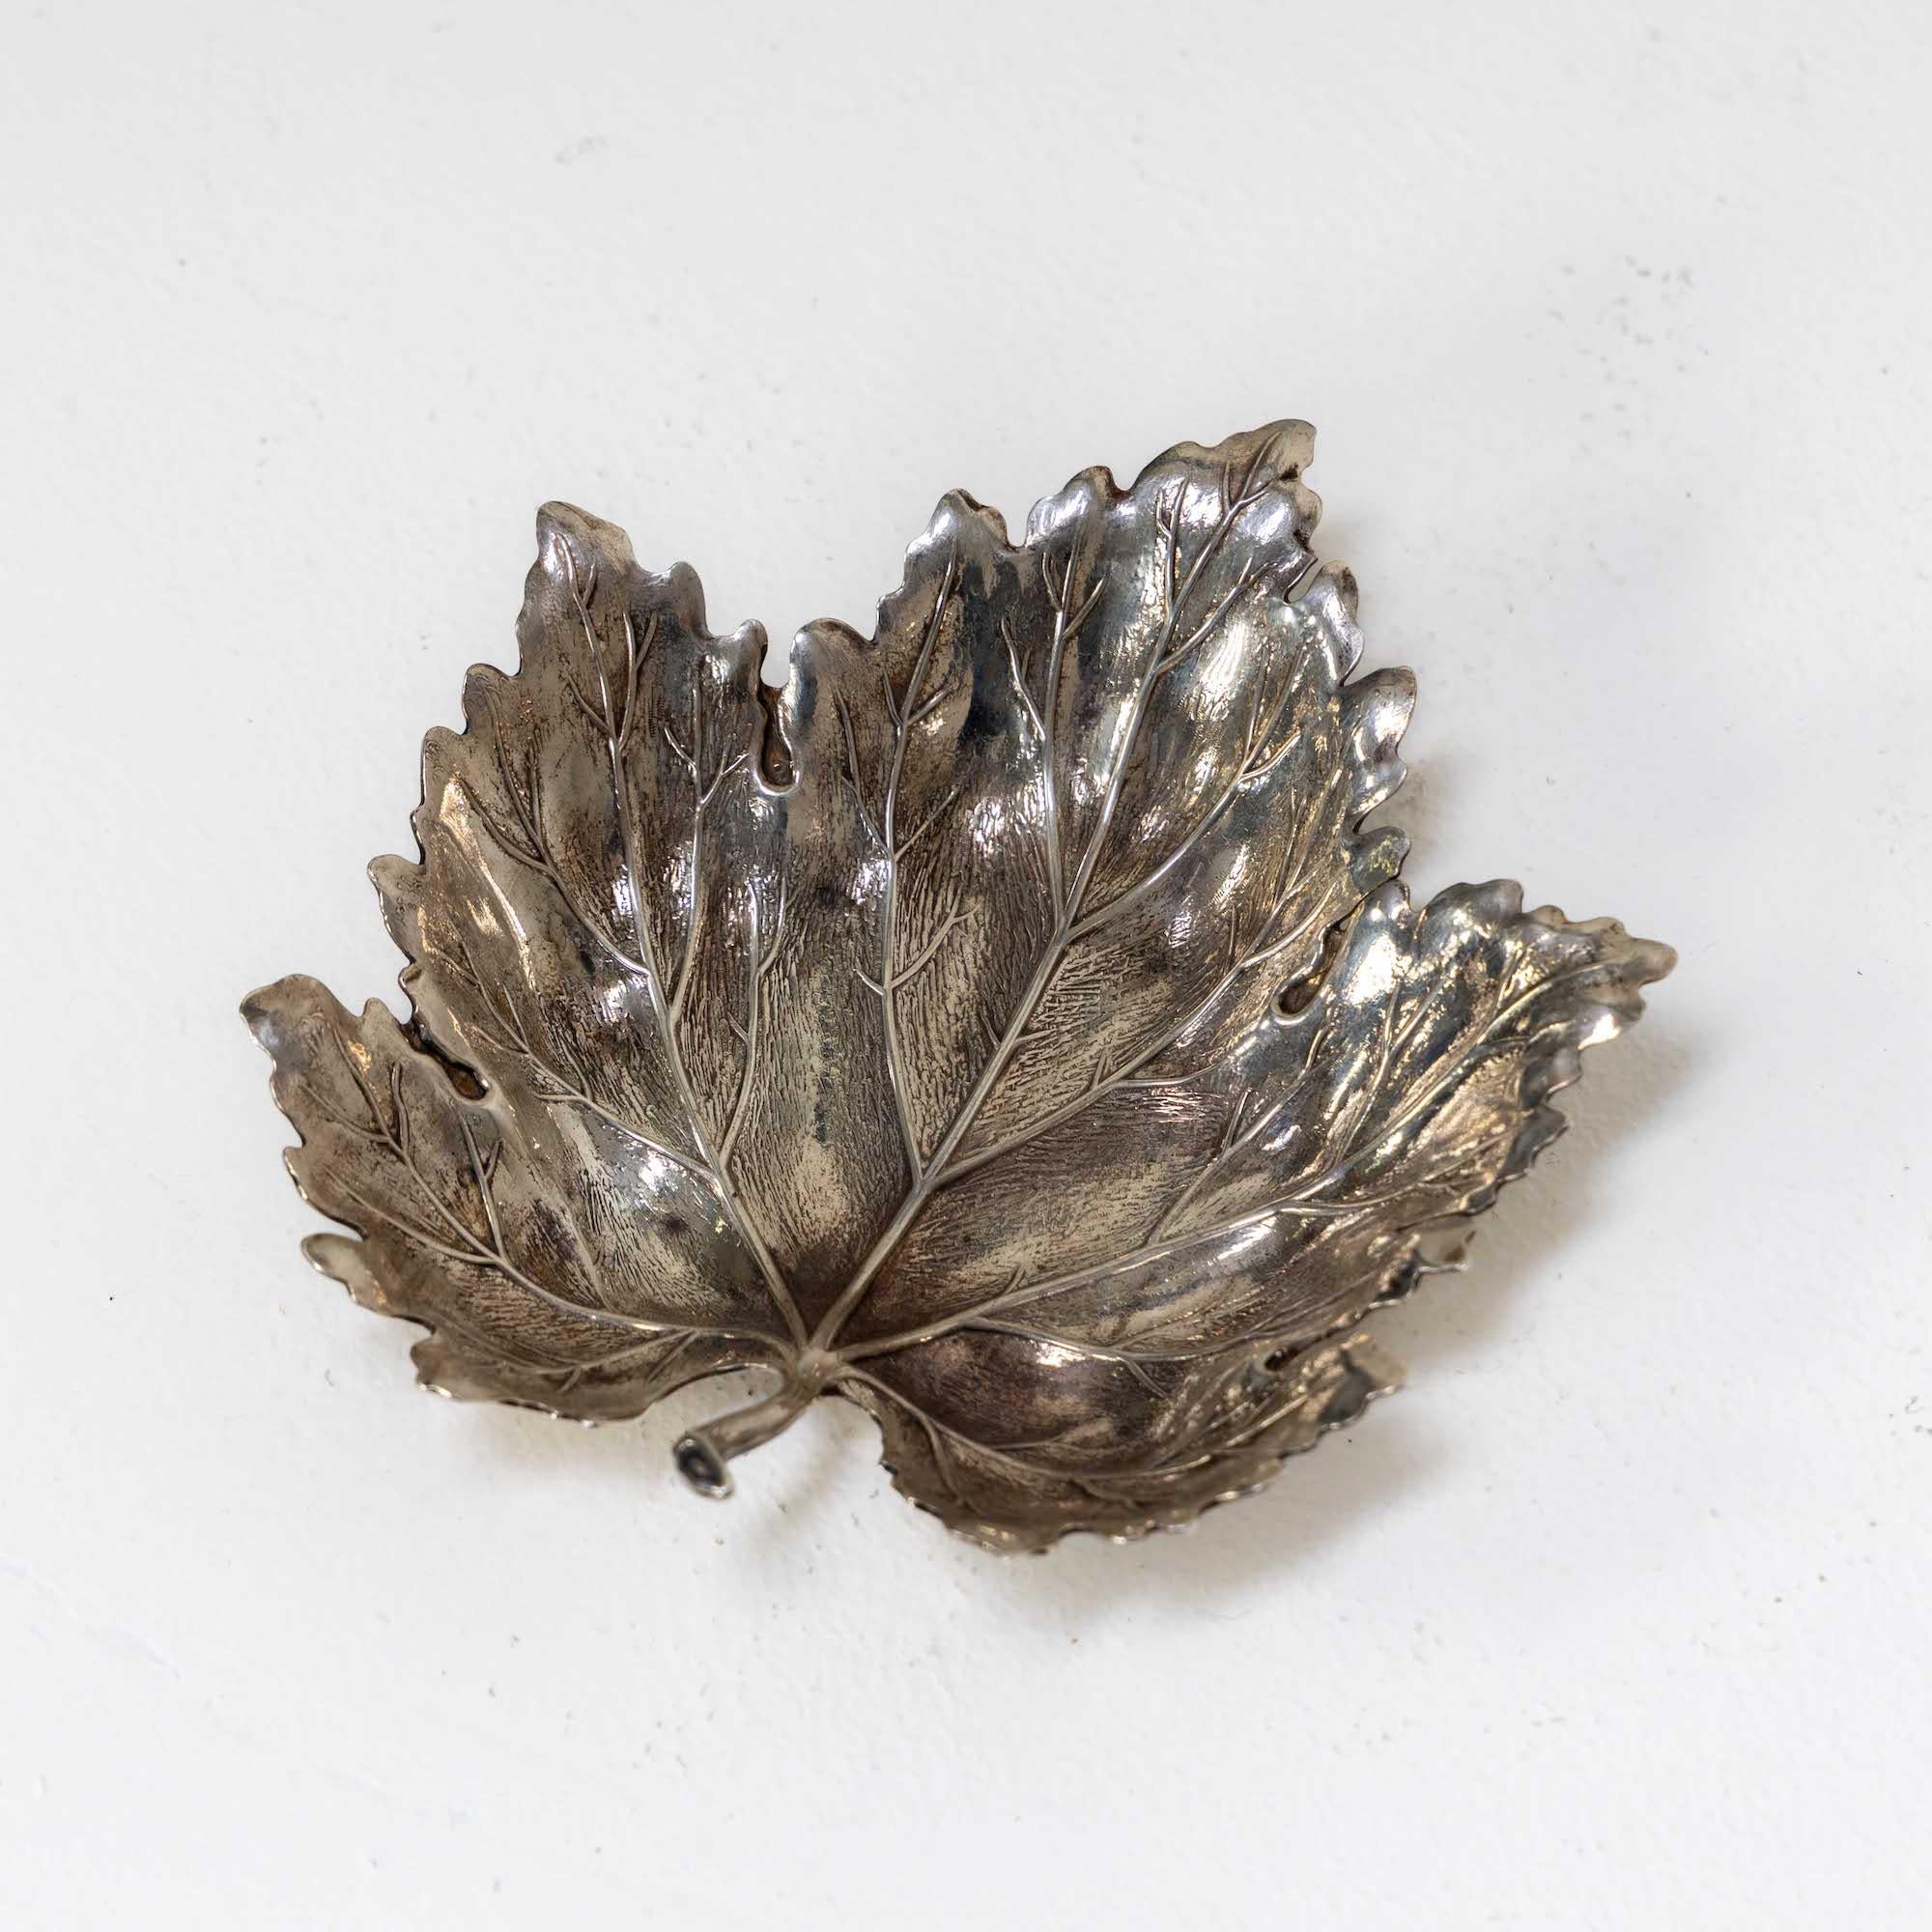 Bowl in the shape of a vine leaf made of 925 silver, weight: 69g. Stamped at the bottom.